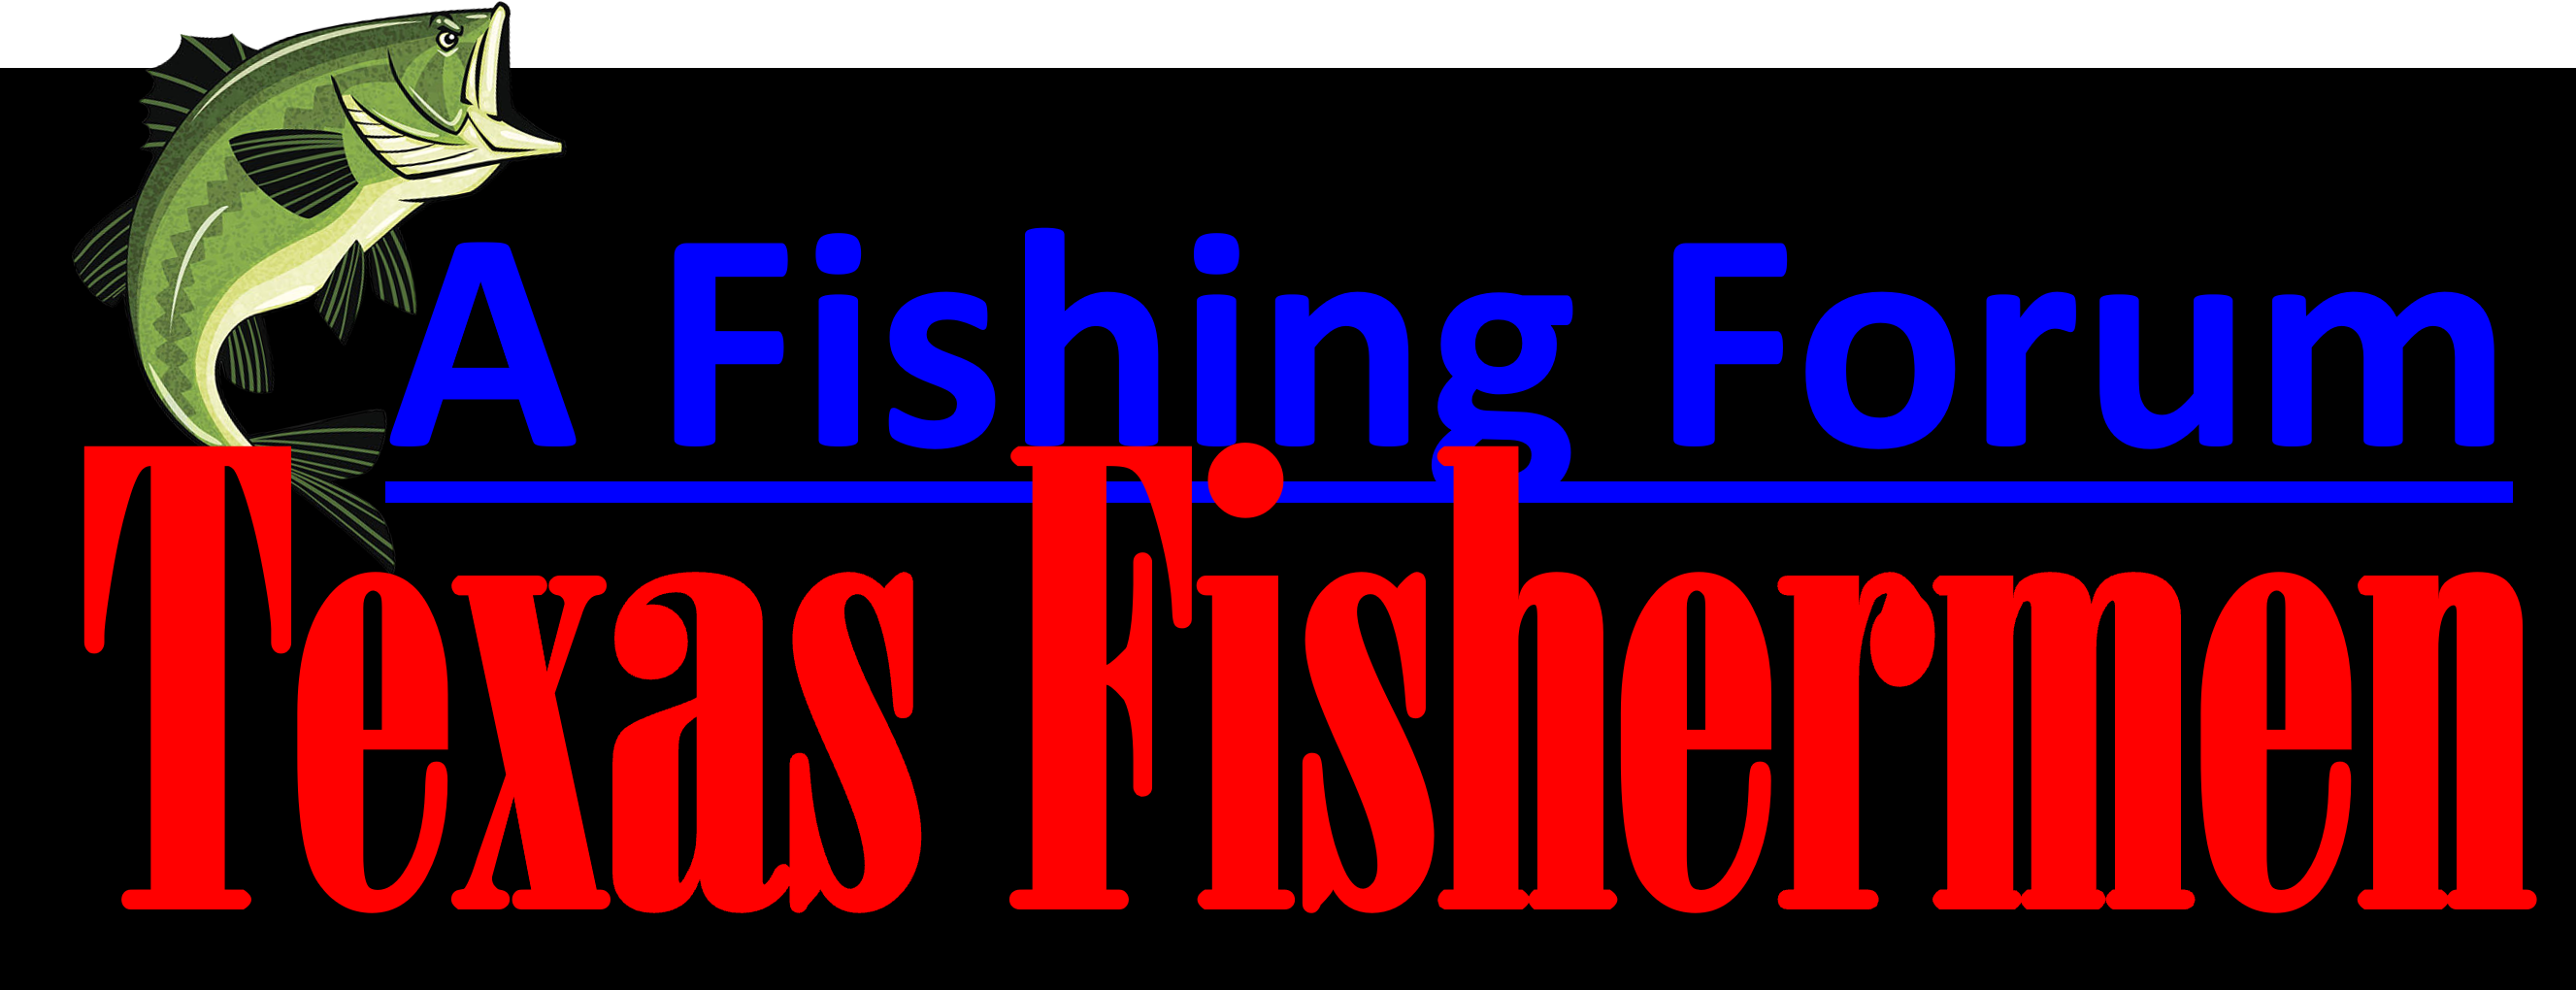 Texas Fishermen: A Fishing Forum for Discussion